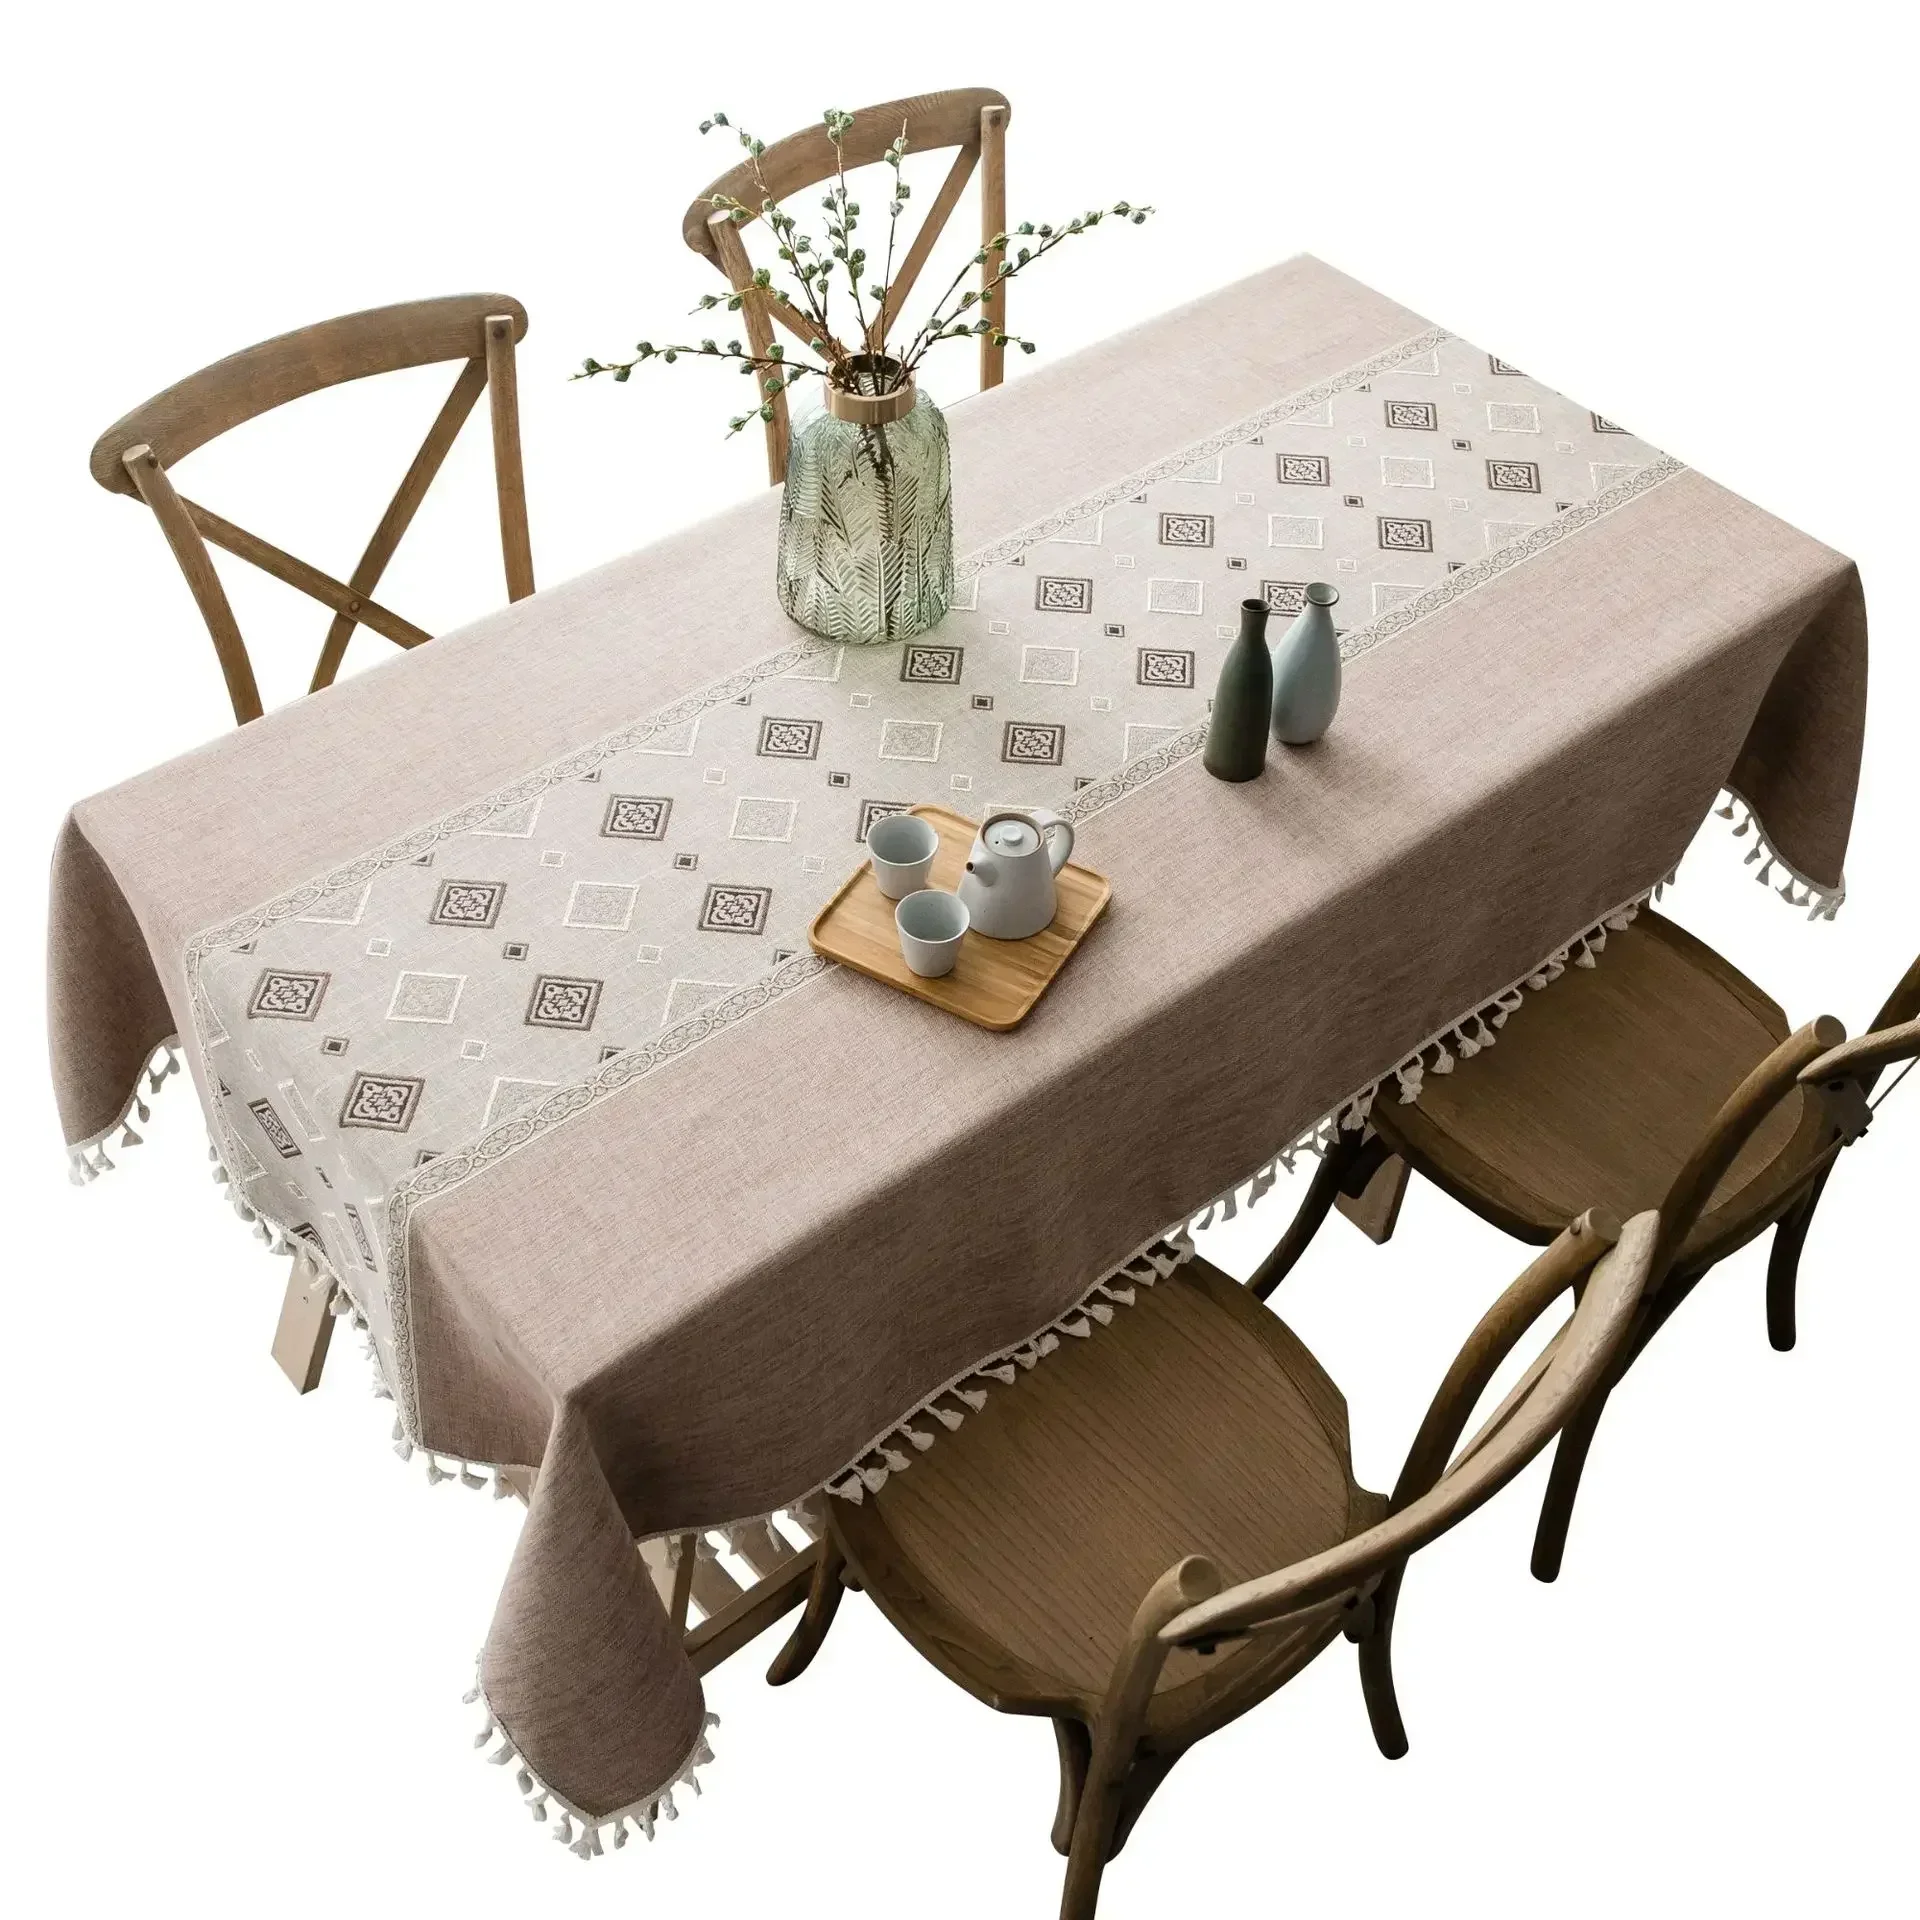 

Fashion Stripe Designs Solid Decorative Linen Tablecloth With Tassels Rectangular Wedding Dining Table Cover Tea Table Cloth